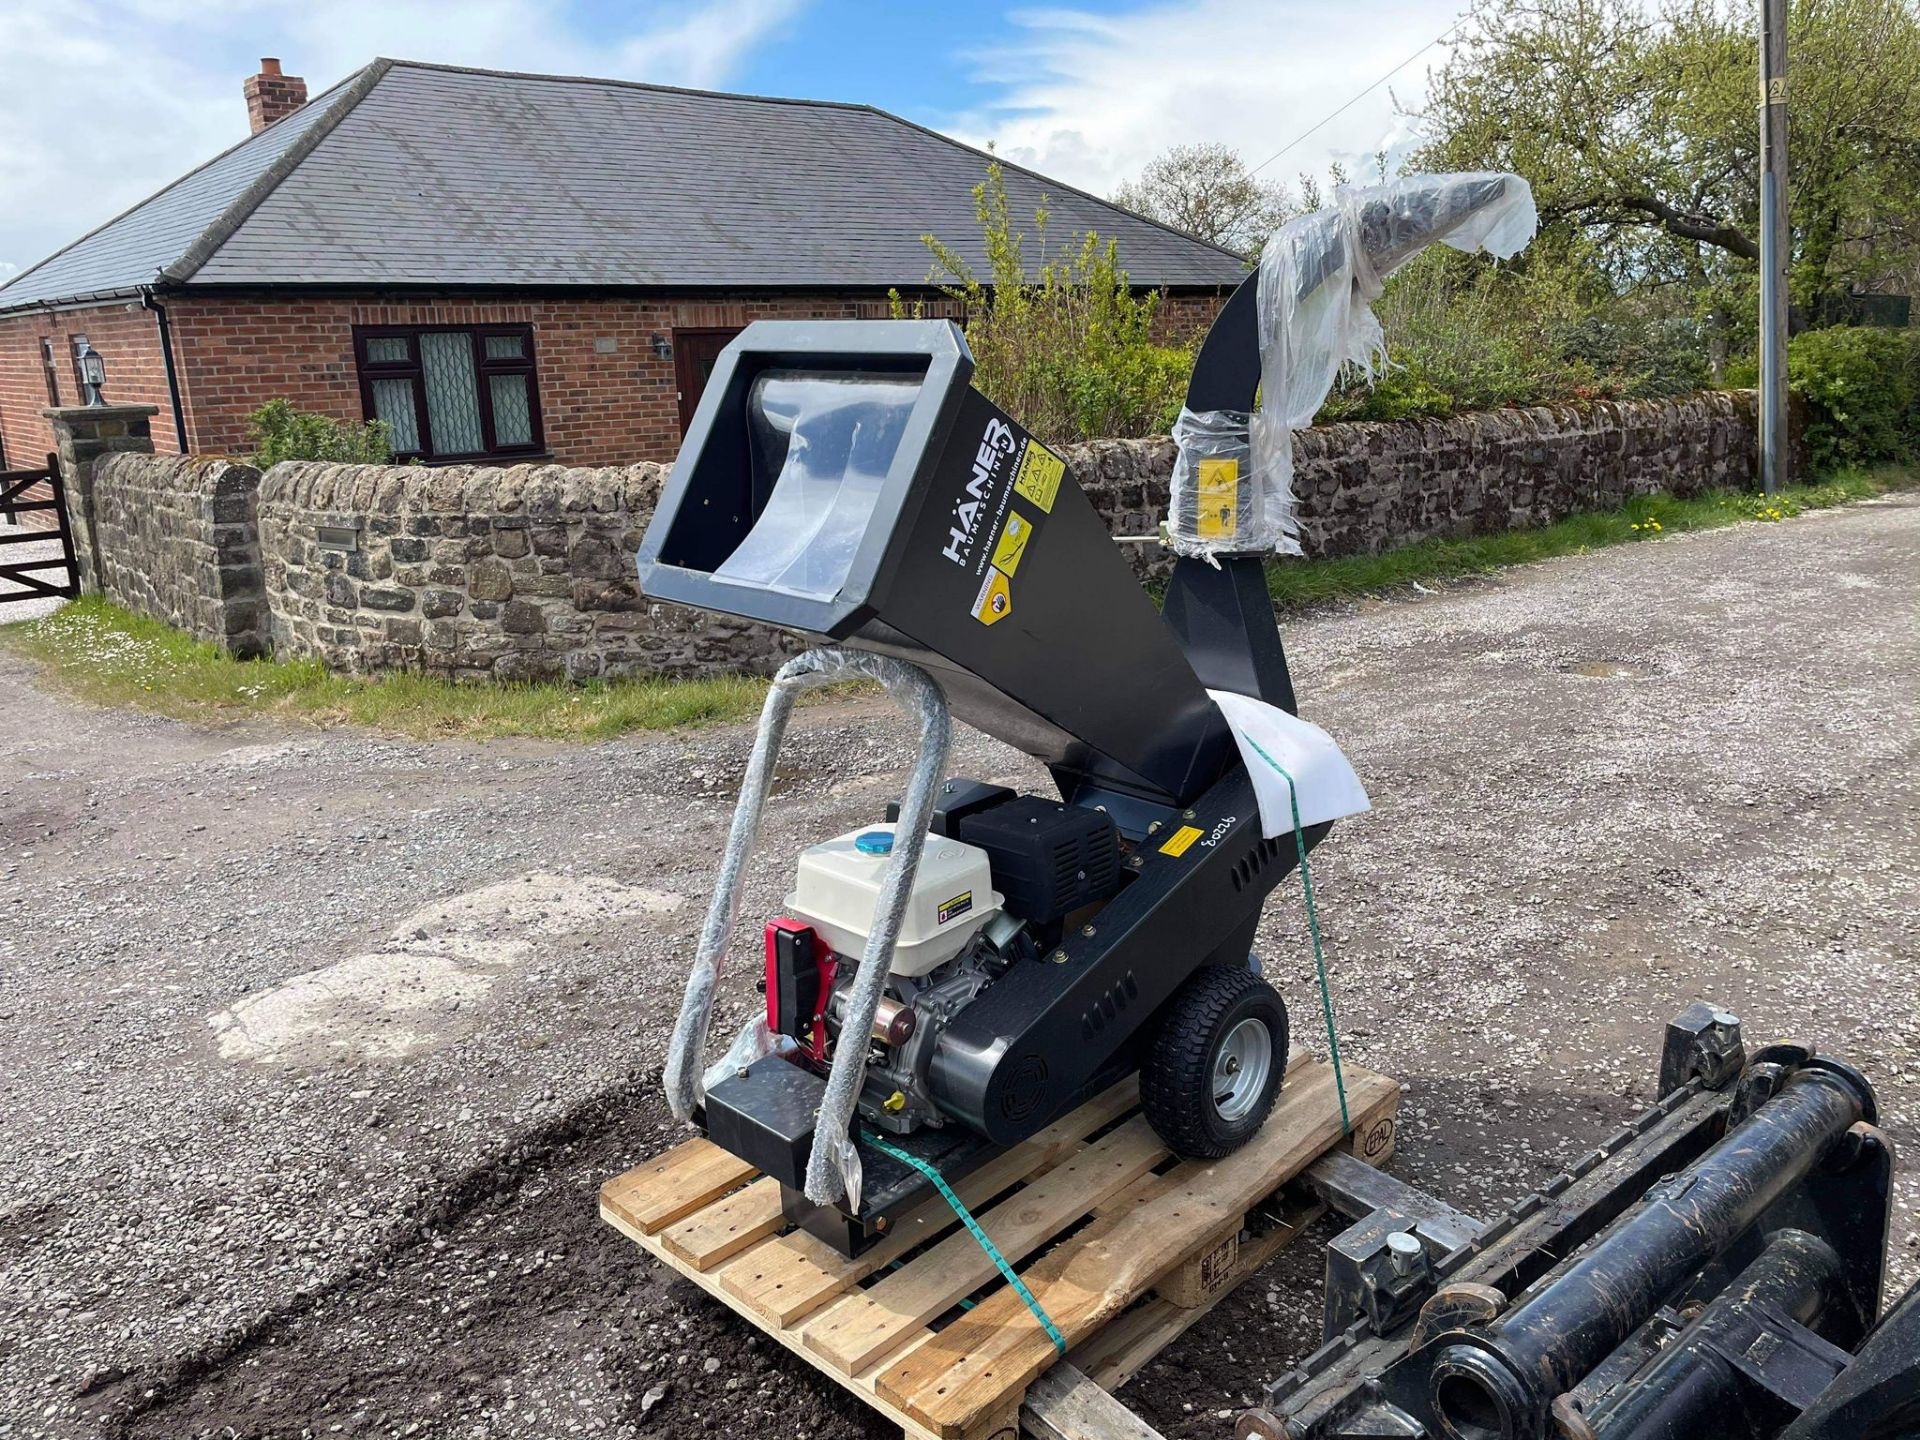 NEW AND UNUSED HANER HHE150E PETROL WOOD CHIPPER, ON WHEELS SO EASY TO MOVE AROUND *PLUS VAT*